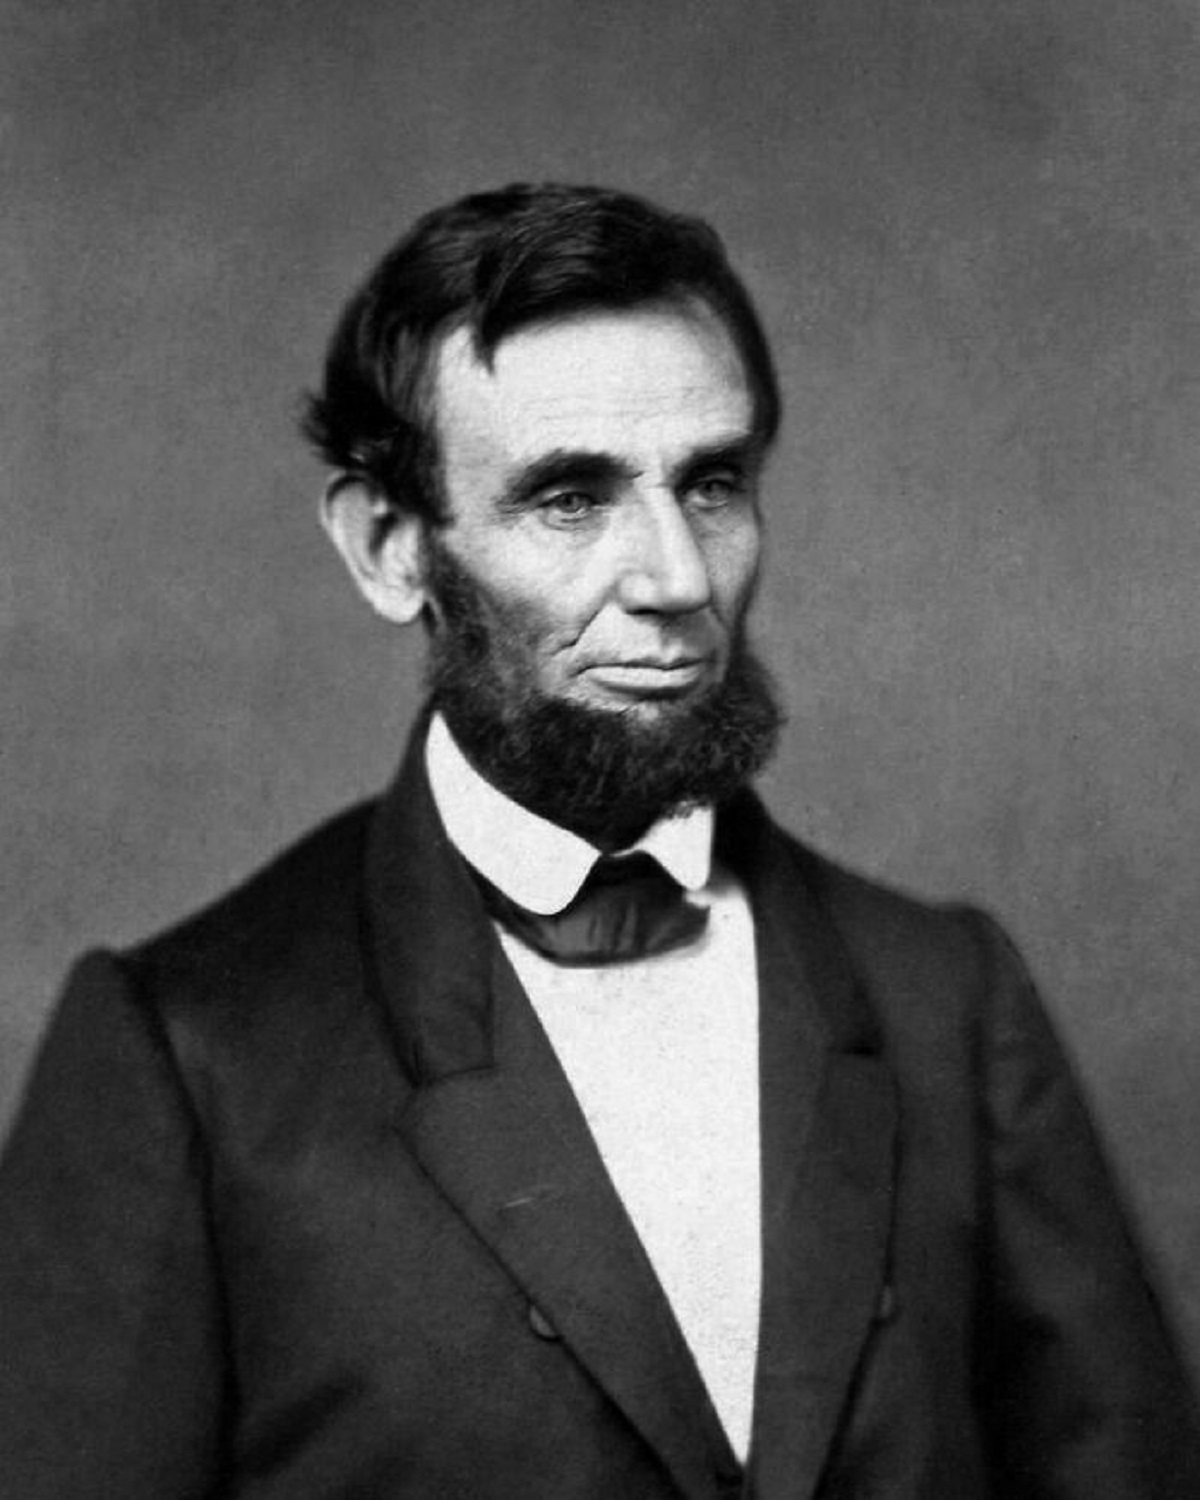 Before he became president, Abraham Lincoln was an elite wrestling champion. In 300 matches, he only lost one. Bonus fun fact: He was also a licensed bartender.